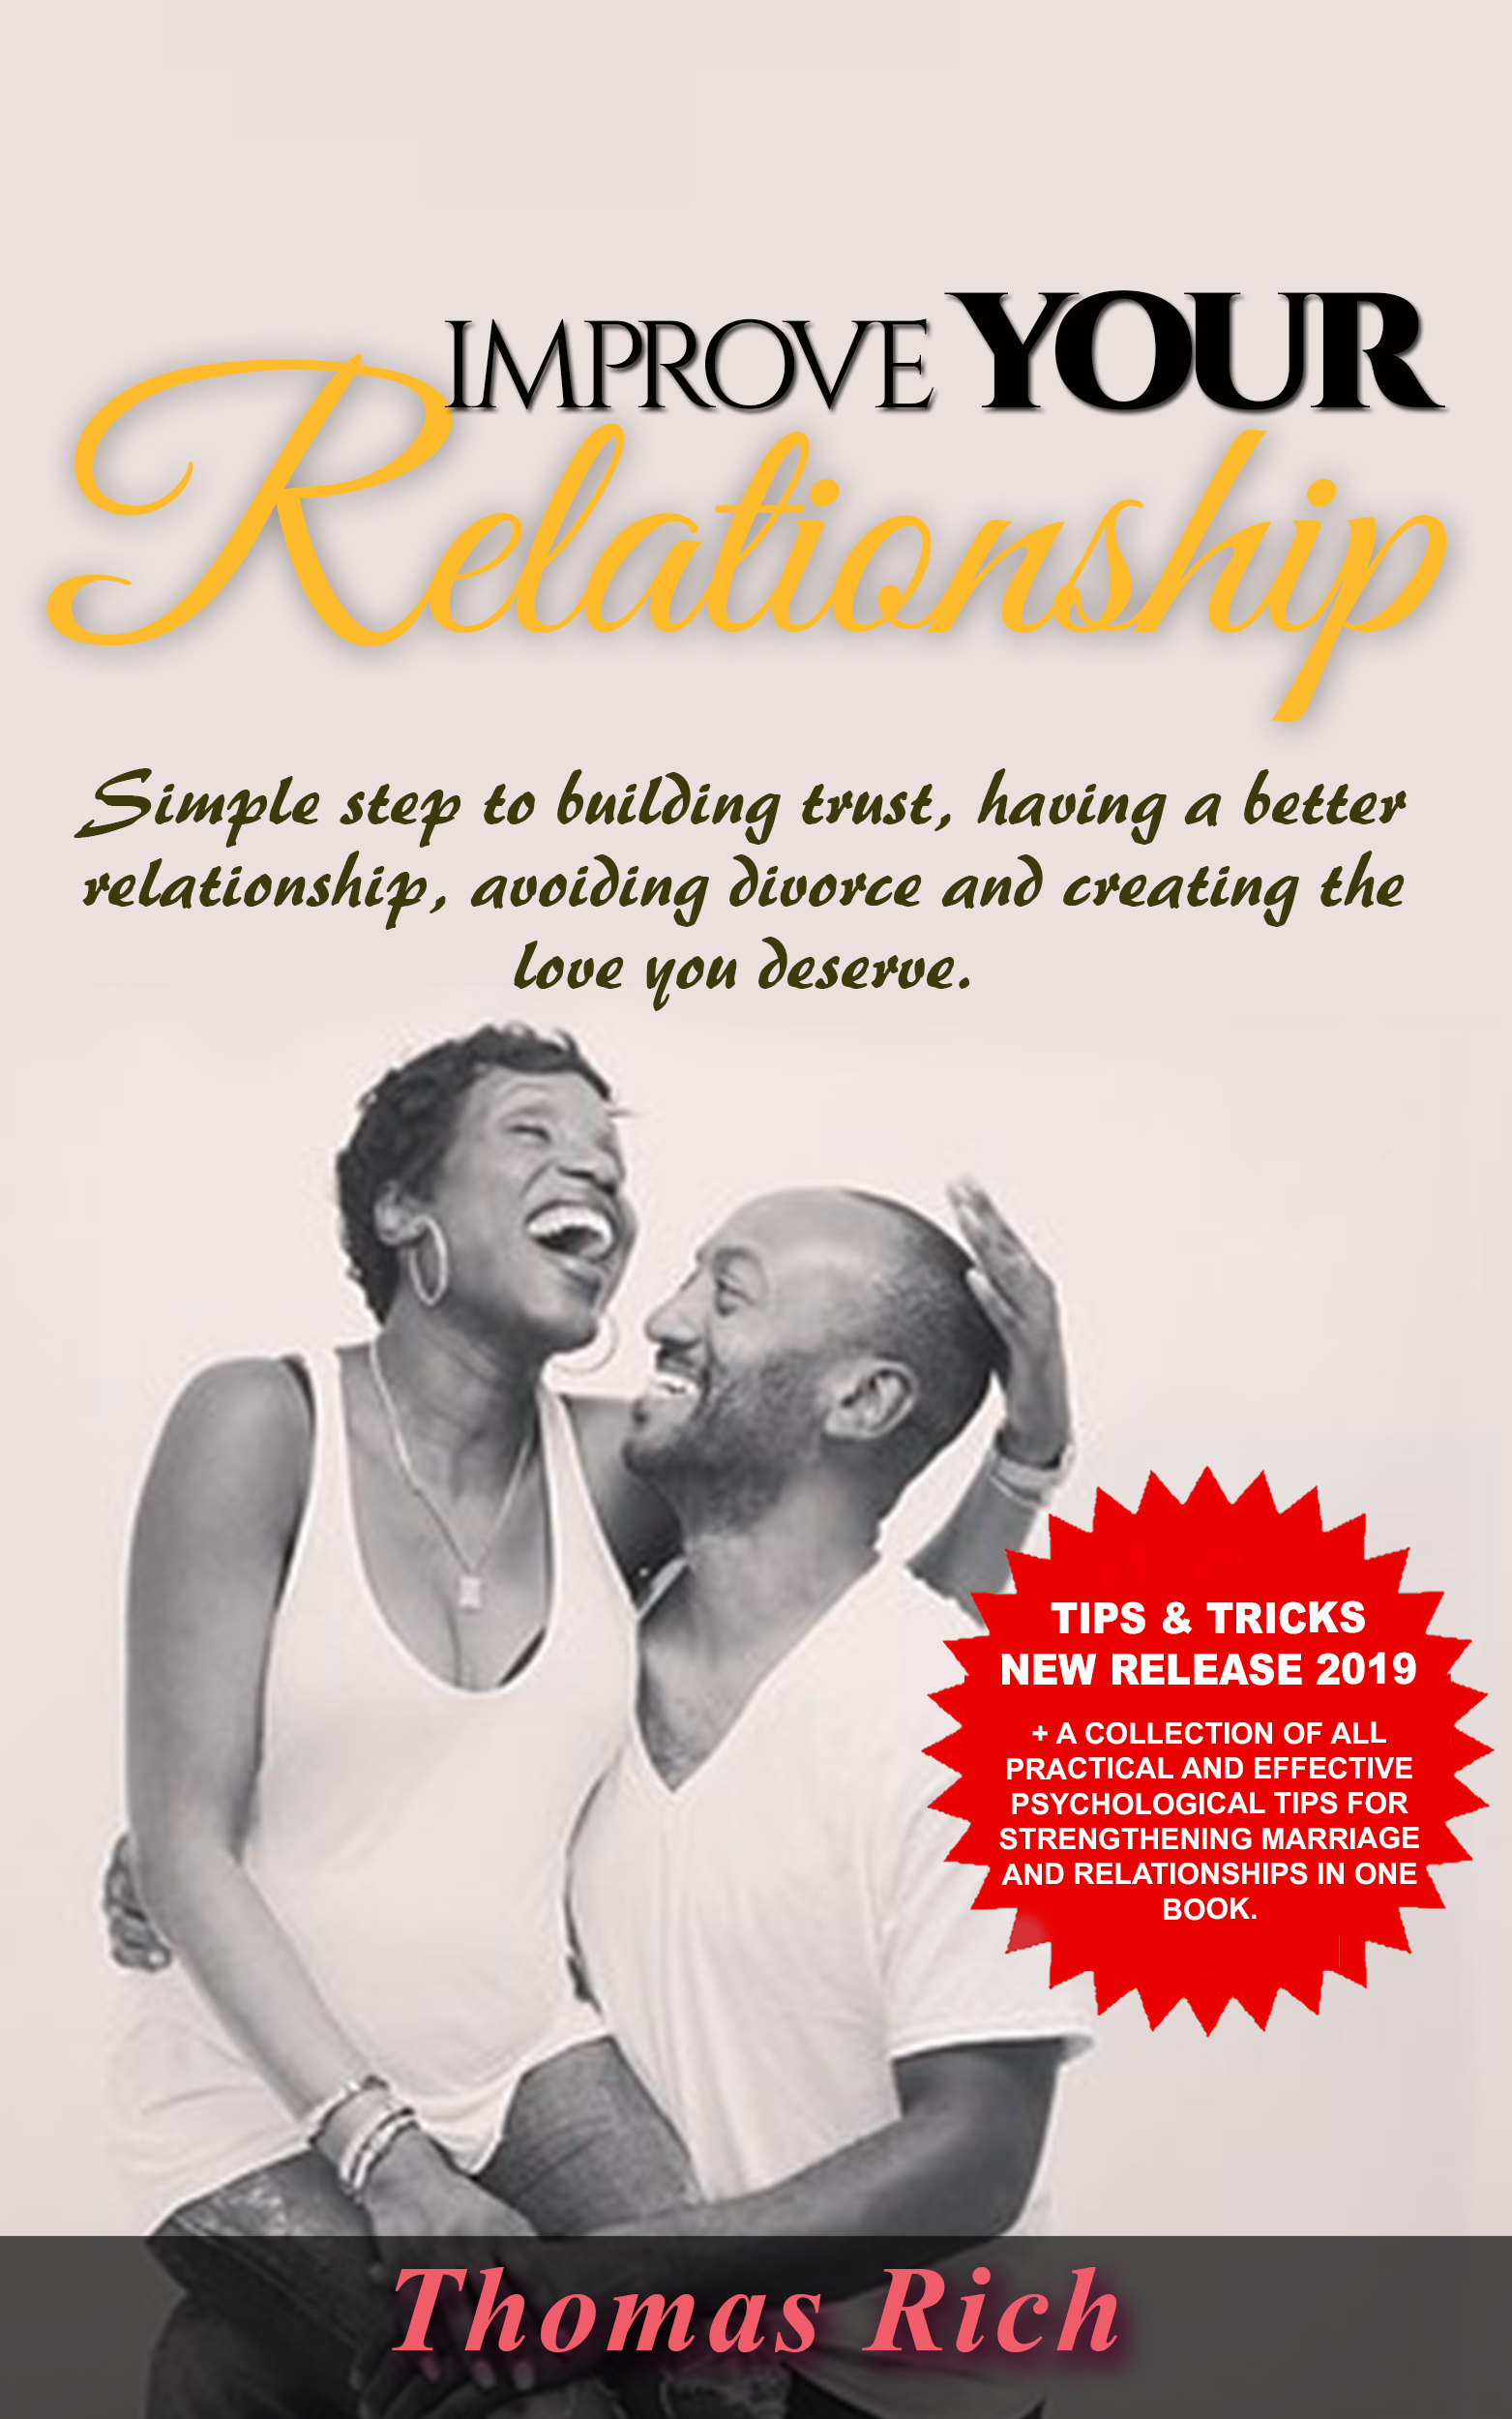 FREE: IMPROVE YOUR RELATIONSHIP: SIMPLE STEPS TO BUILDING TRUST, HAVING A BETTER RELATIONSHIP, AVOIDING DIVORCE AND CREATING THE LOVE YOU DESERVE by Thomas Rich